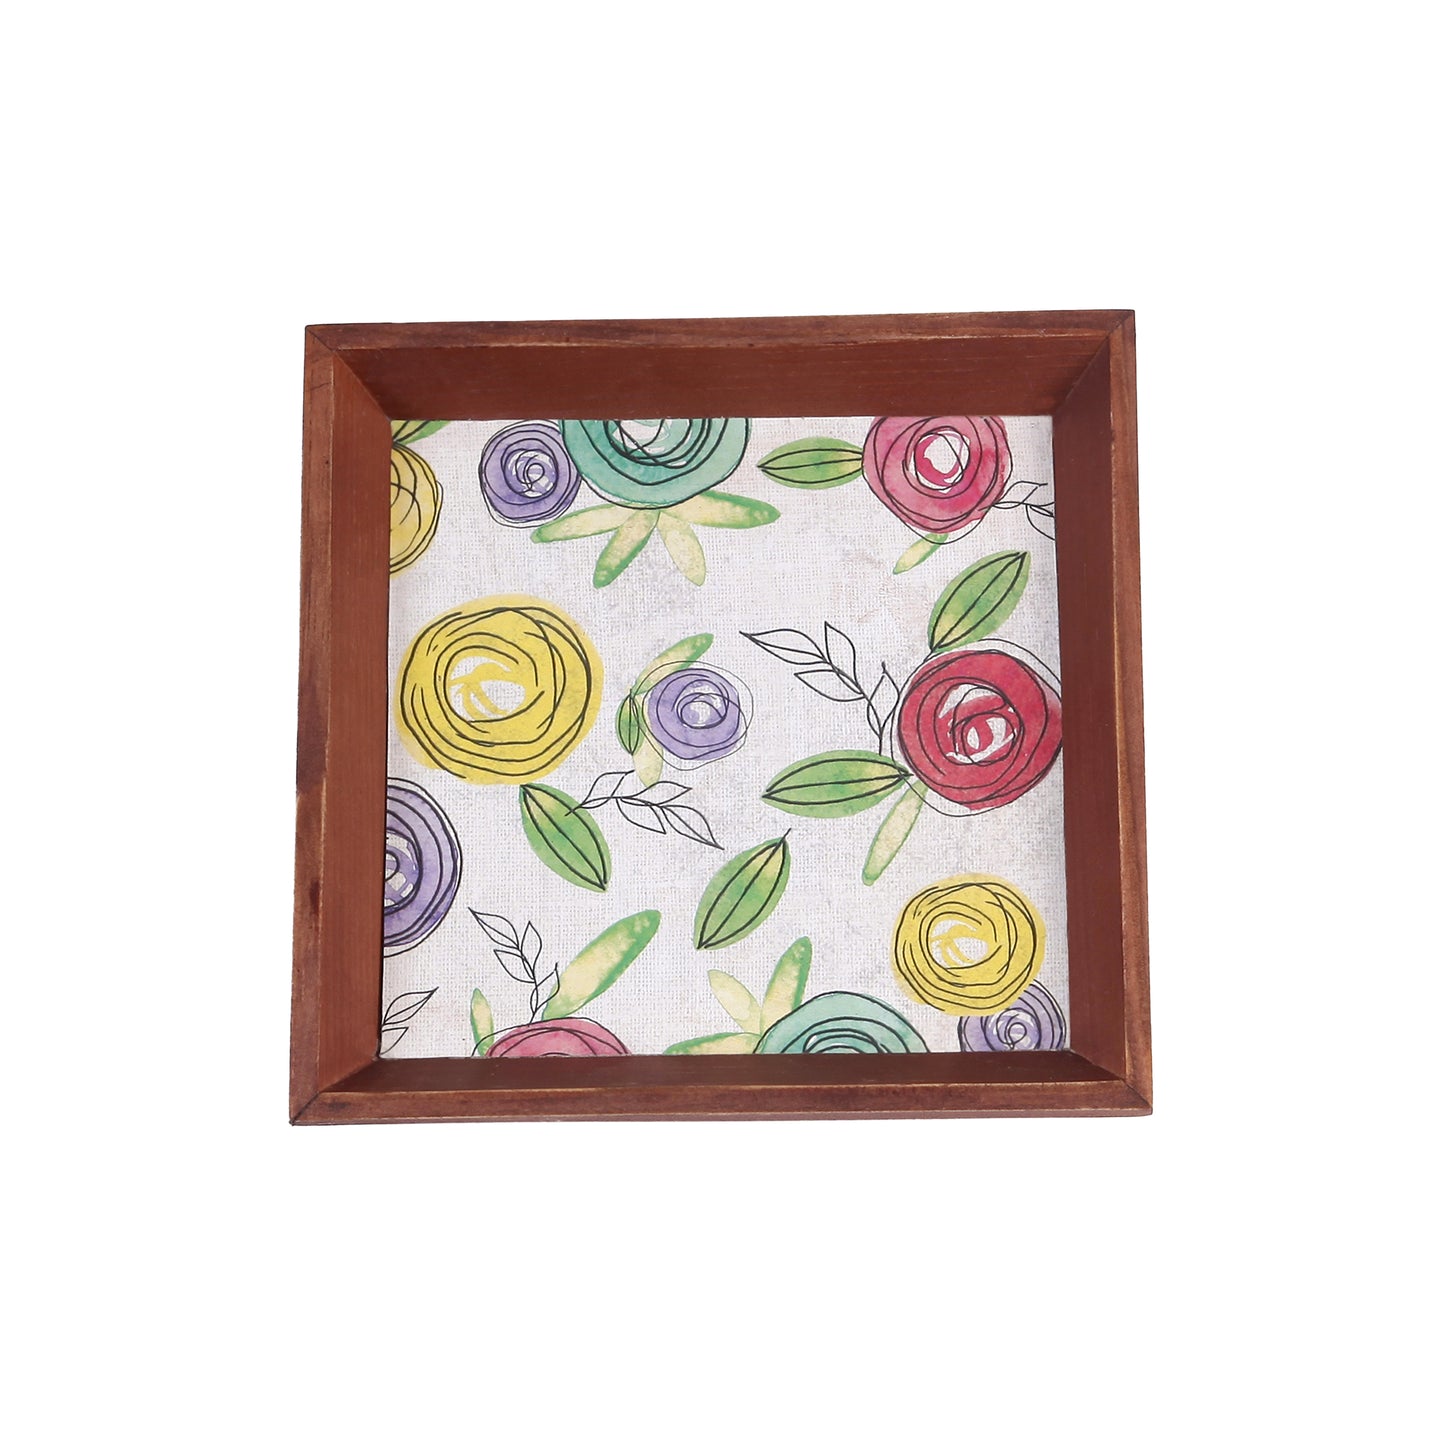 A Tiny Mistake Flora Small Square Wooden Serving Tray, 18 x 18 x 2 cm